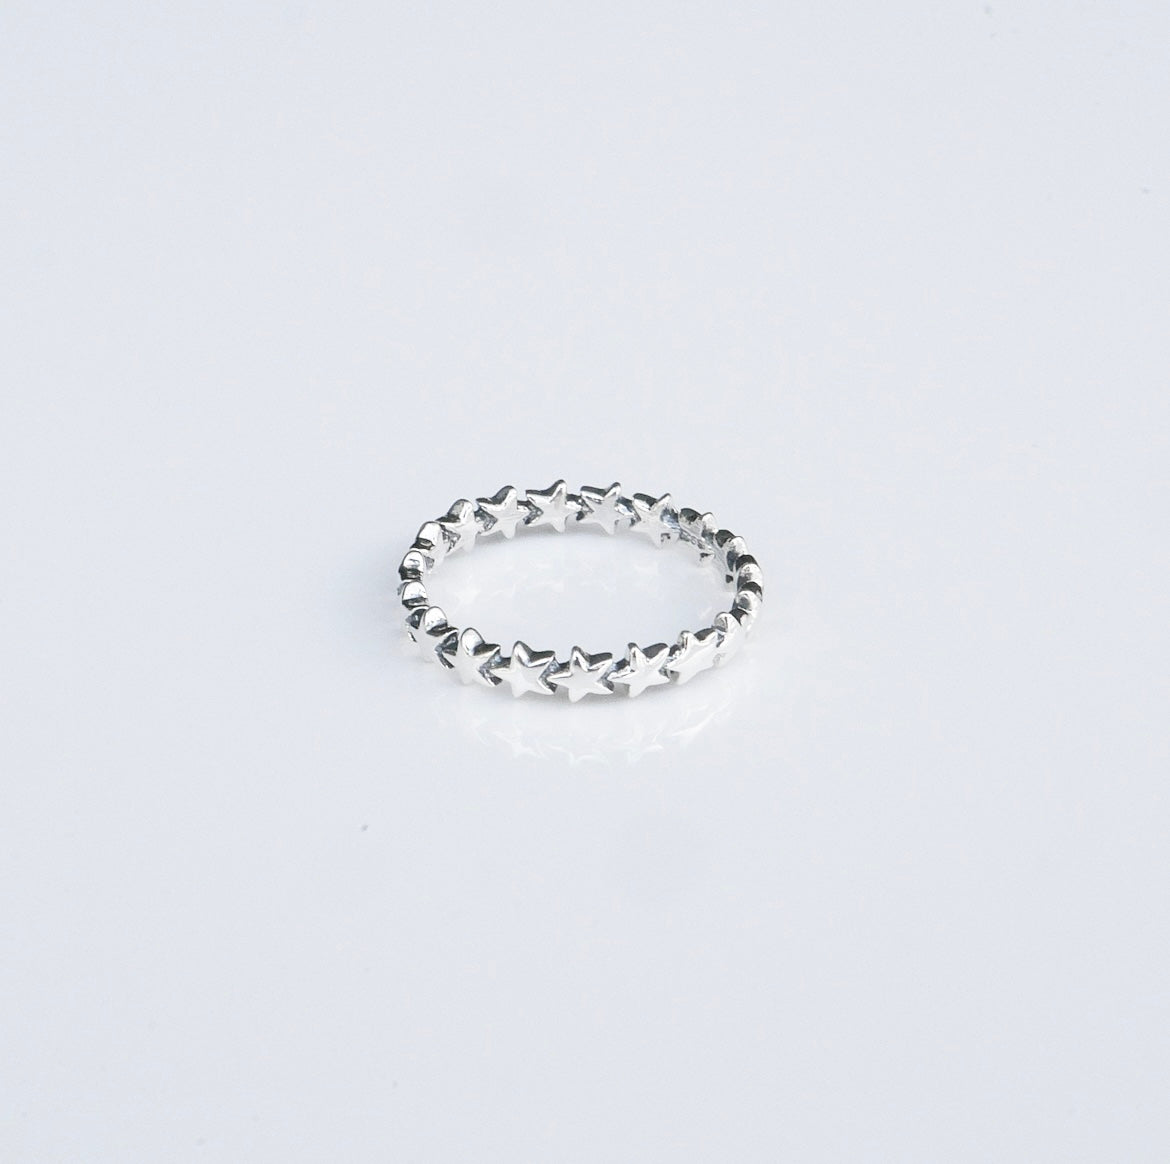 Star Ring, .925 Sterling Silver Fashionable Dainty Plain Silver Band Rings